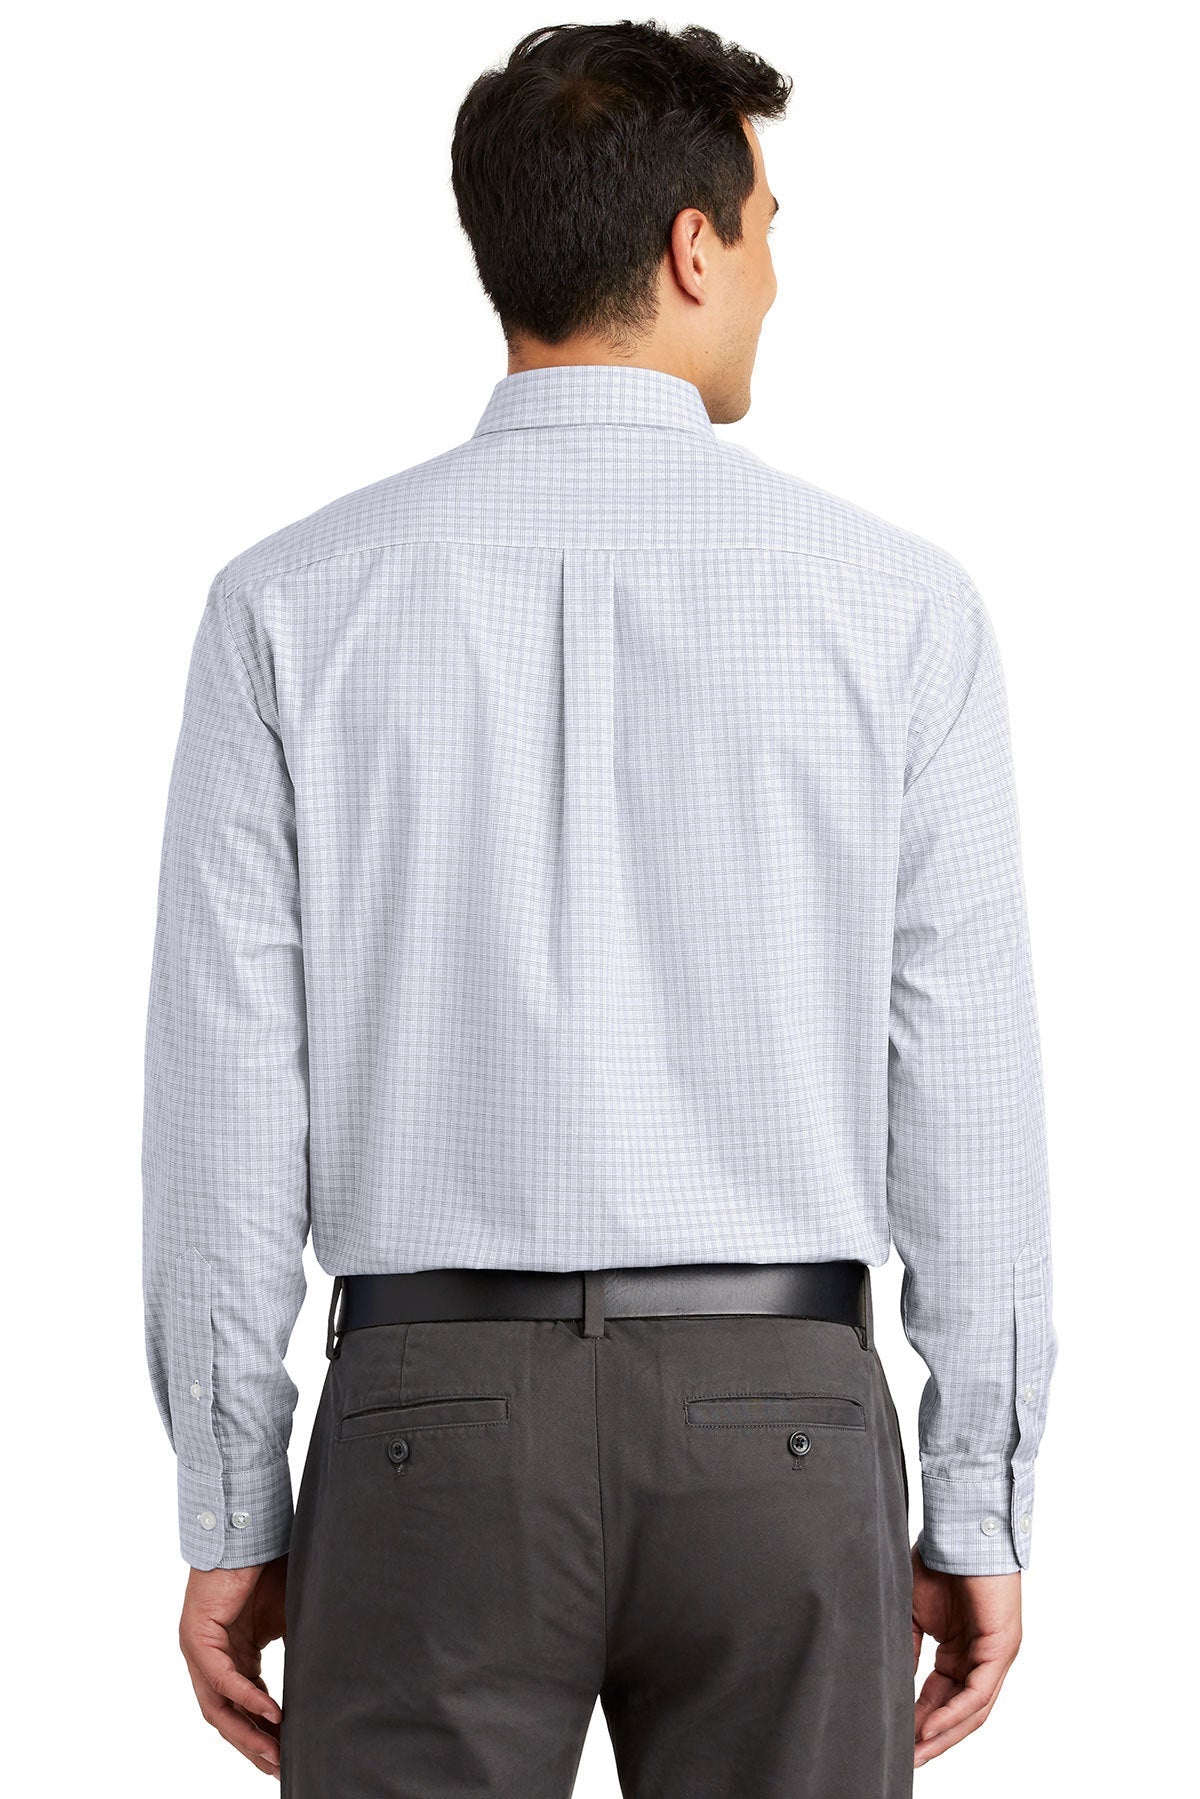 port authority_s639 _white_company_logo_button downs